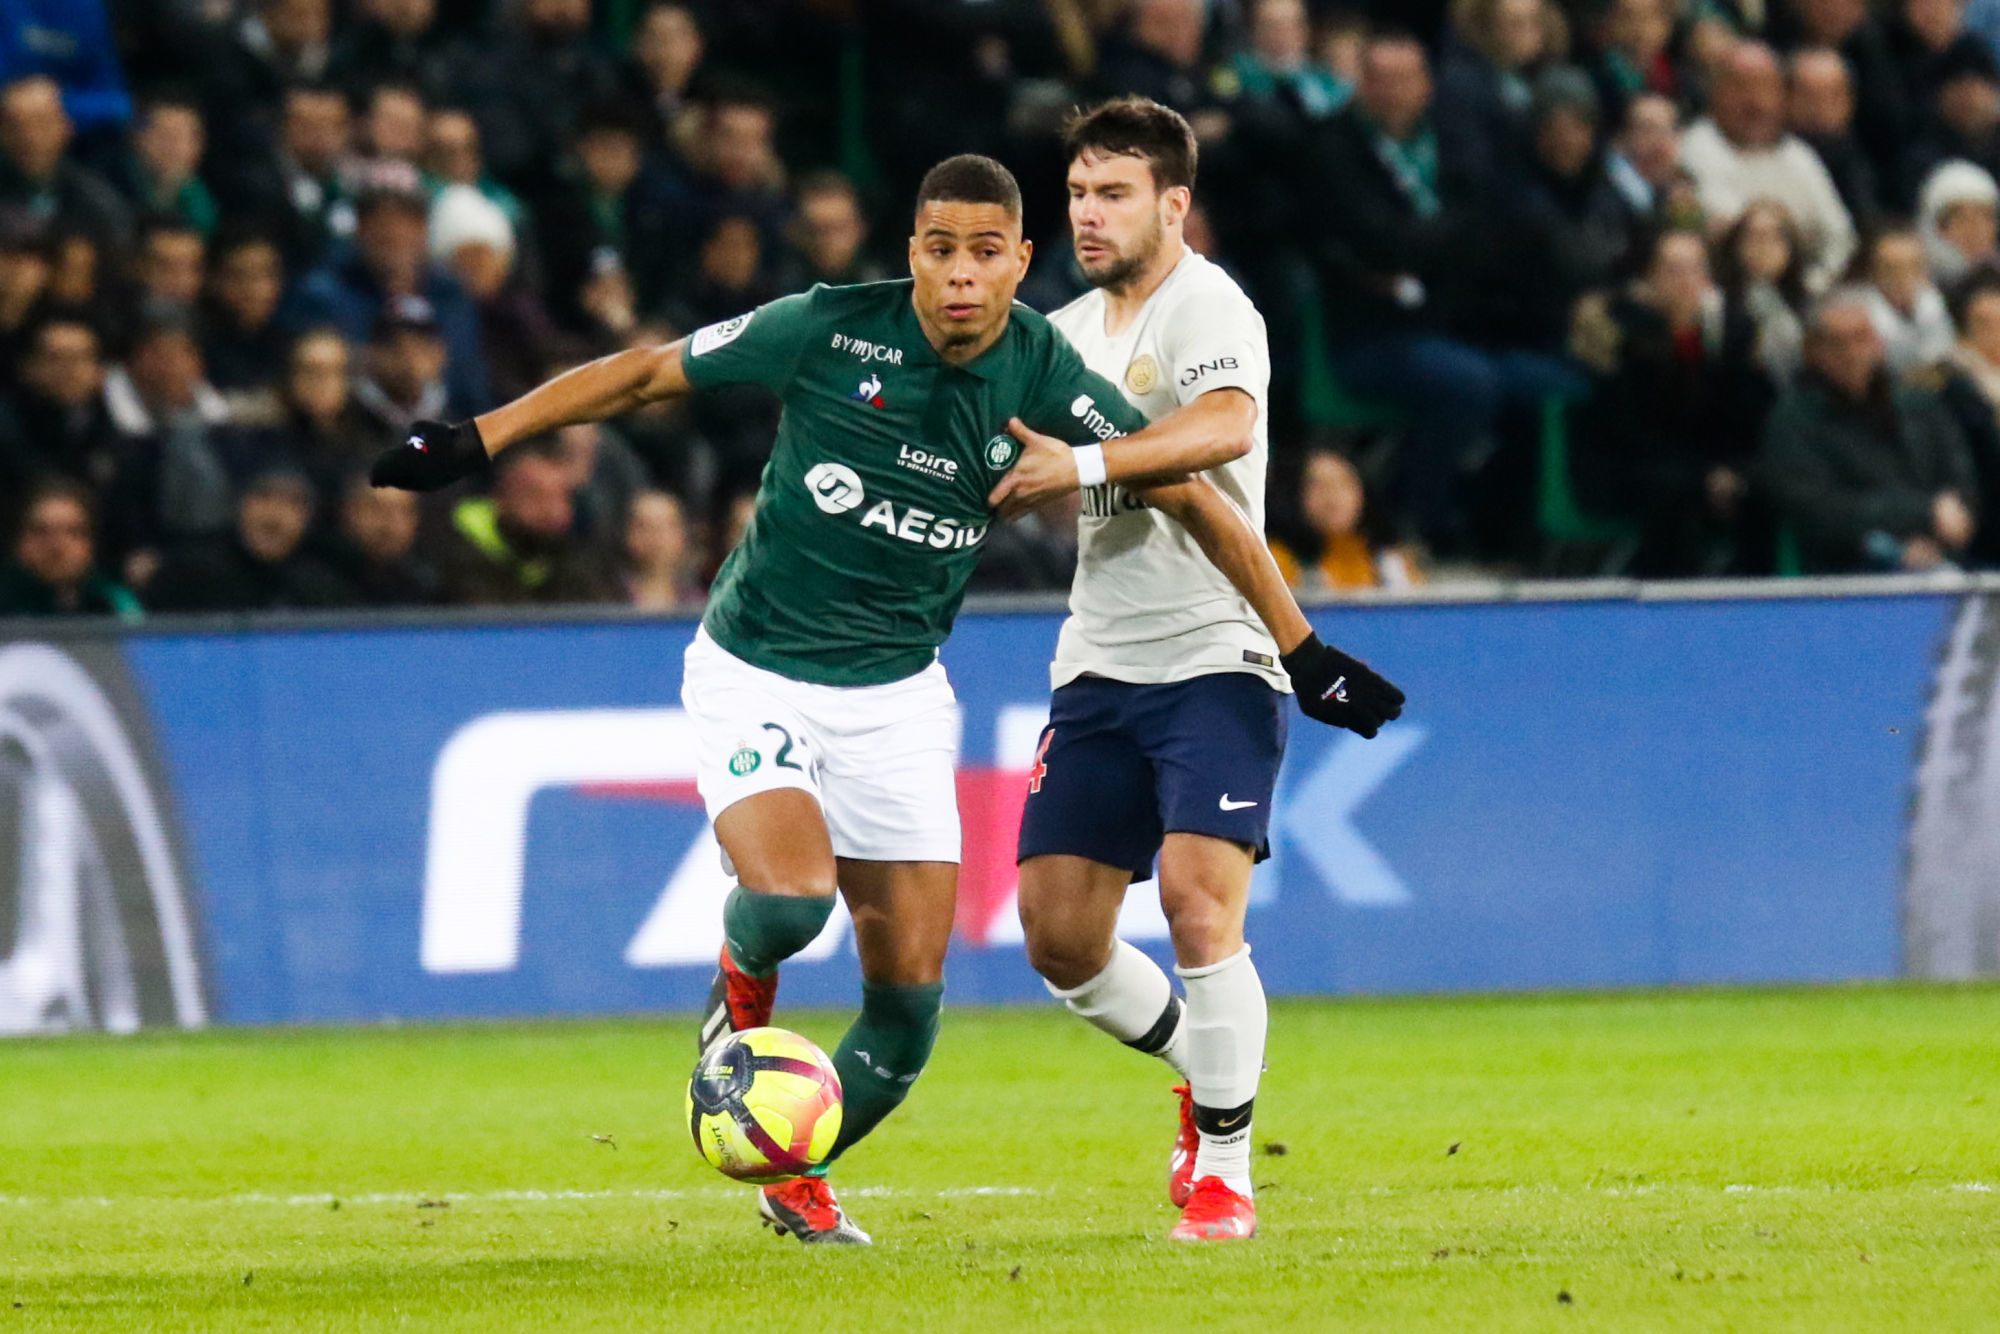 Monnet Paquet Kevin of Saint Etienne and Bernat Velasco Juan of Paris during the Ligue 1 match between Saint Etienne and Paris Saint Germain at Stade Geoffroy-Guichard on February 17, 2019 in Saint-Etienne, France. (Photo by Romain Biard/Icon Sport)